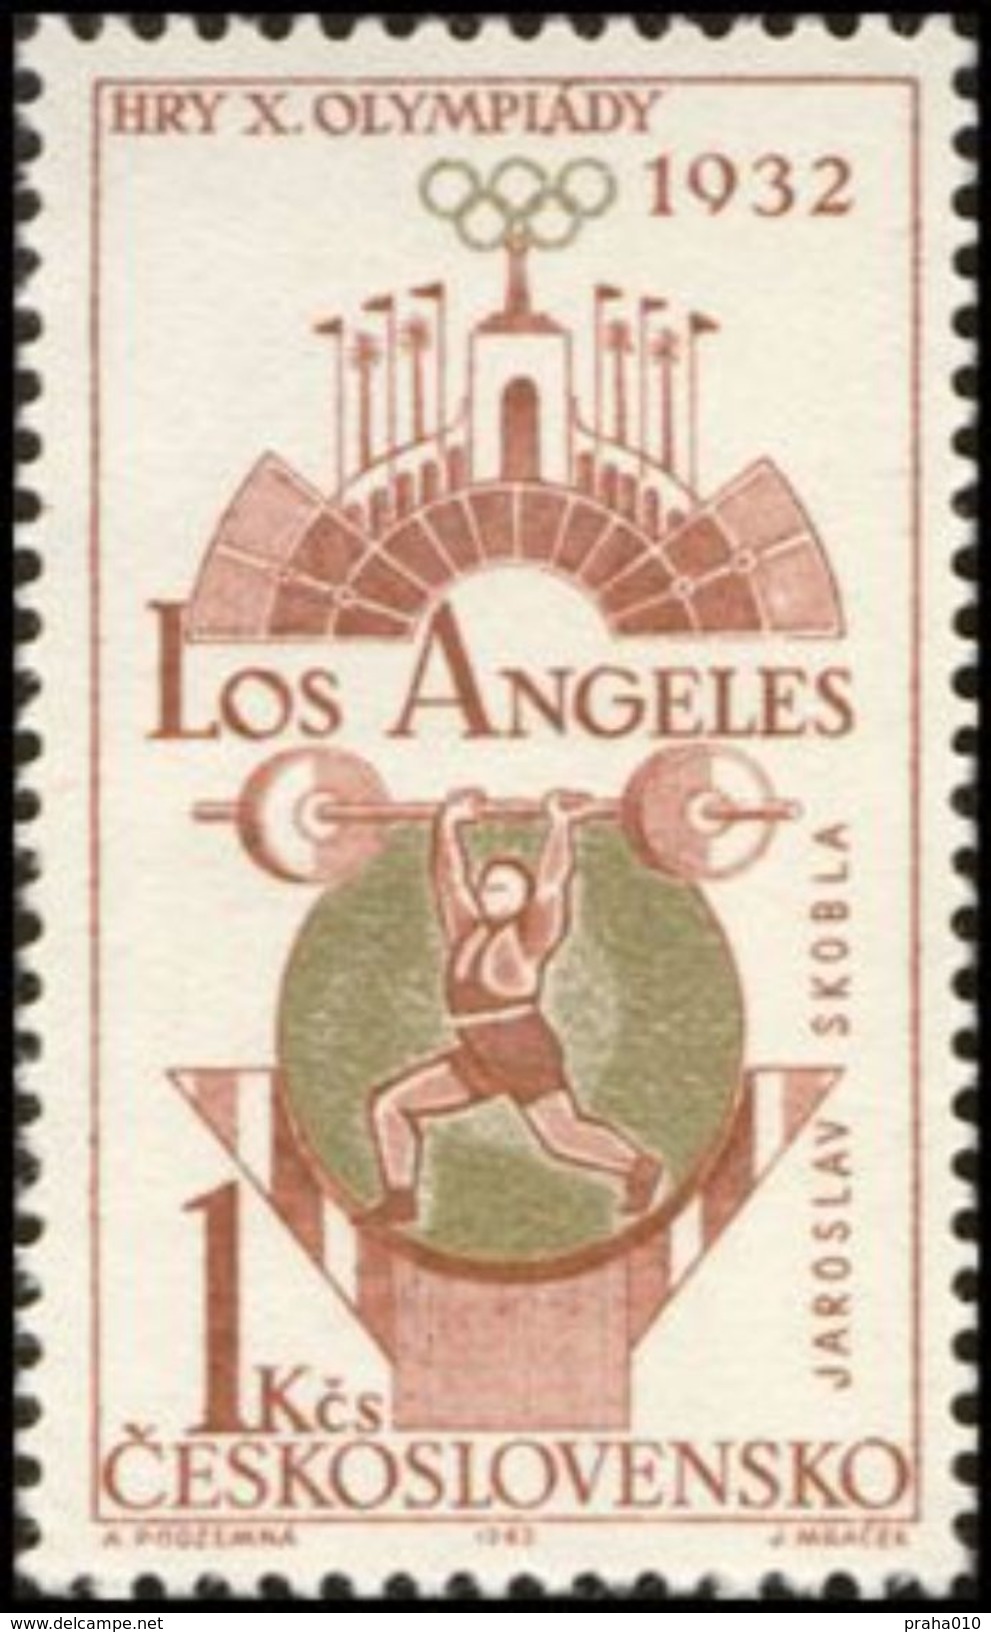 Czechoslovakia / Stamps (1965) 1431: Olympic Games 1932 Los Angeles, J. Skobla (weight-lifting); Painter: A. Podzemna - Ete 1932: Los Angeles